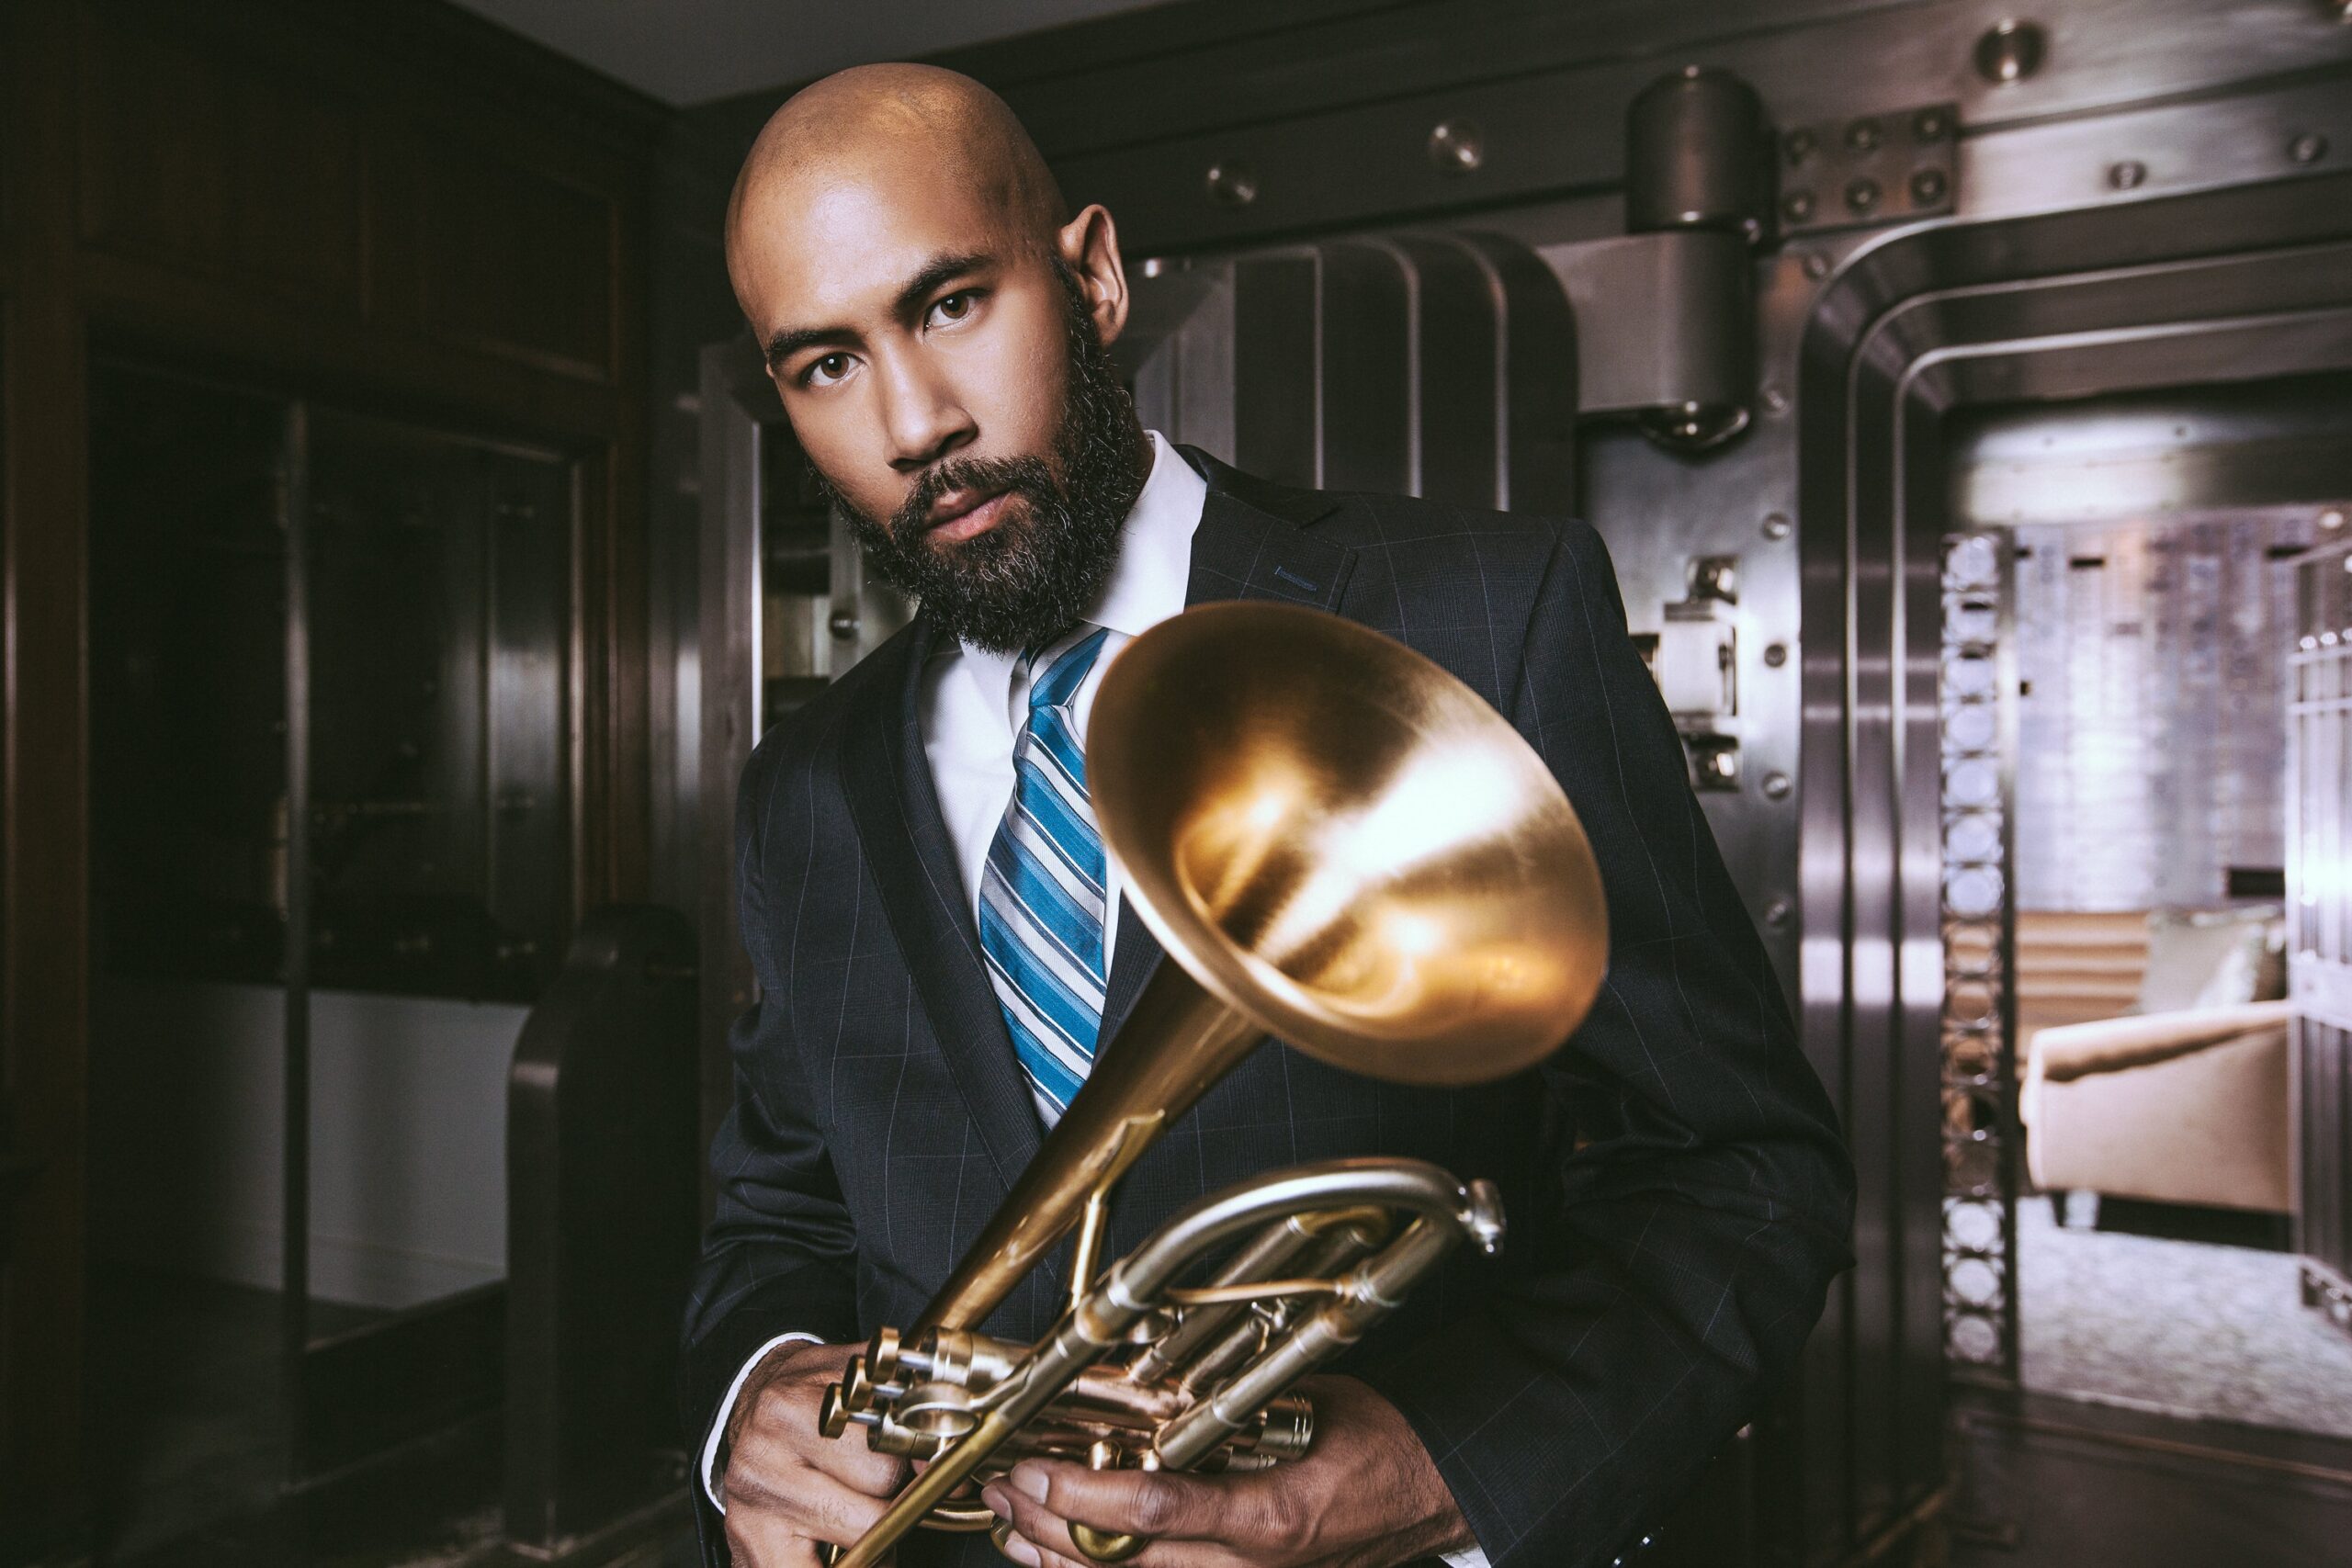 A musician in a suit and tie looks into the camera and holds a trumpet